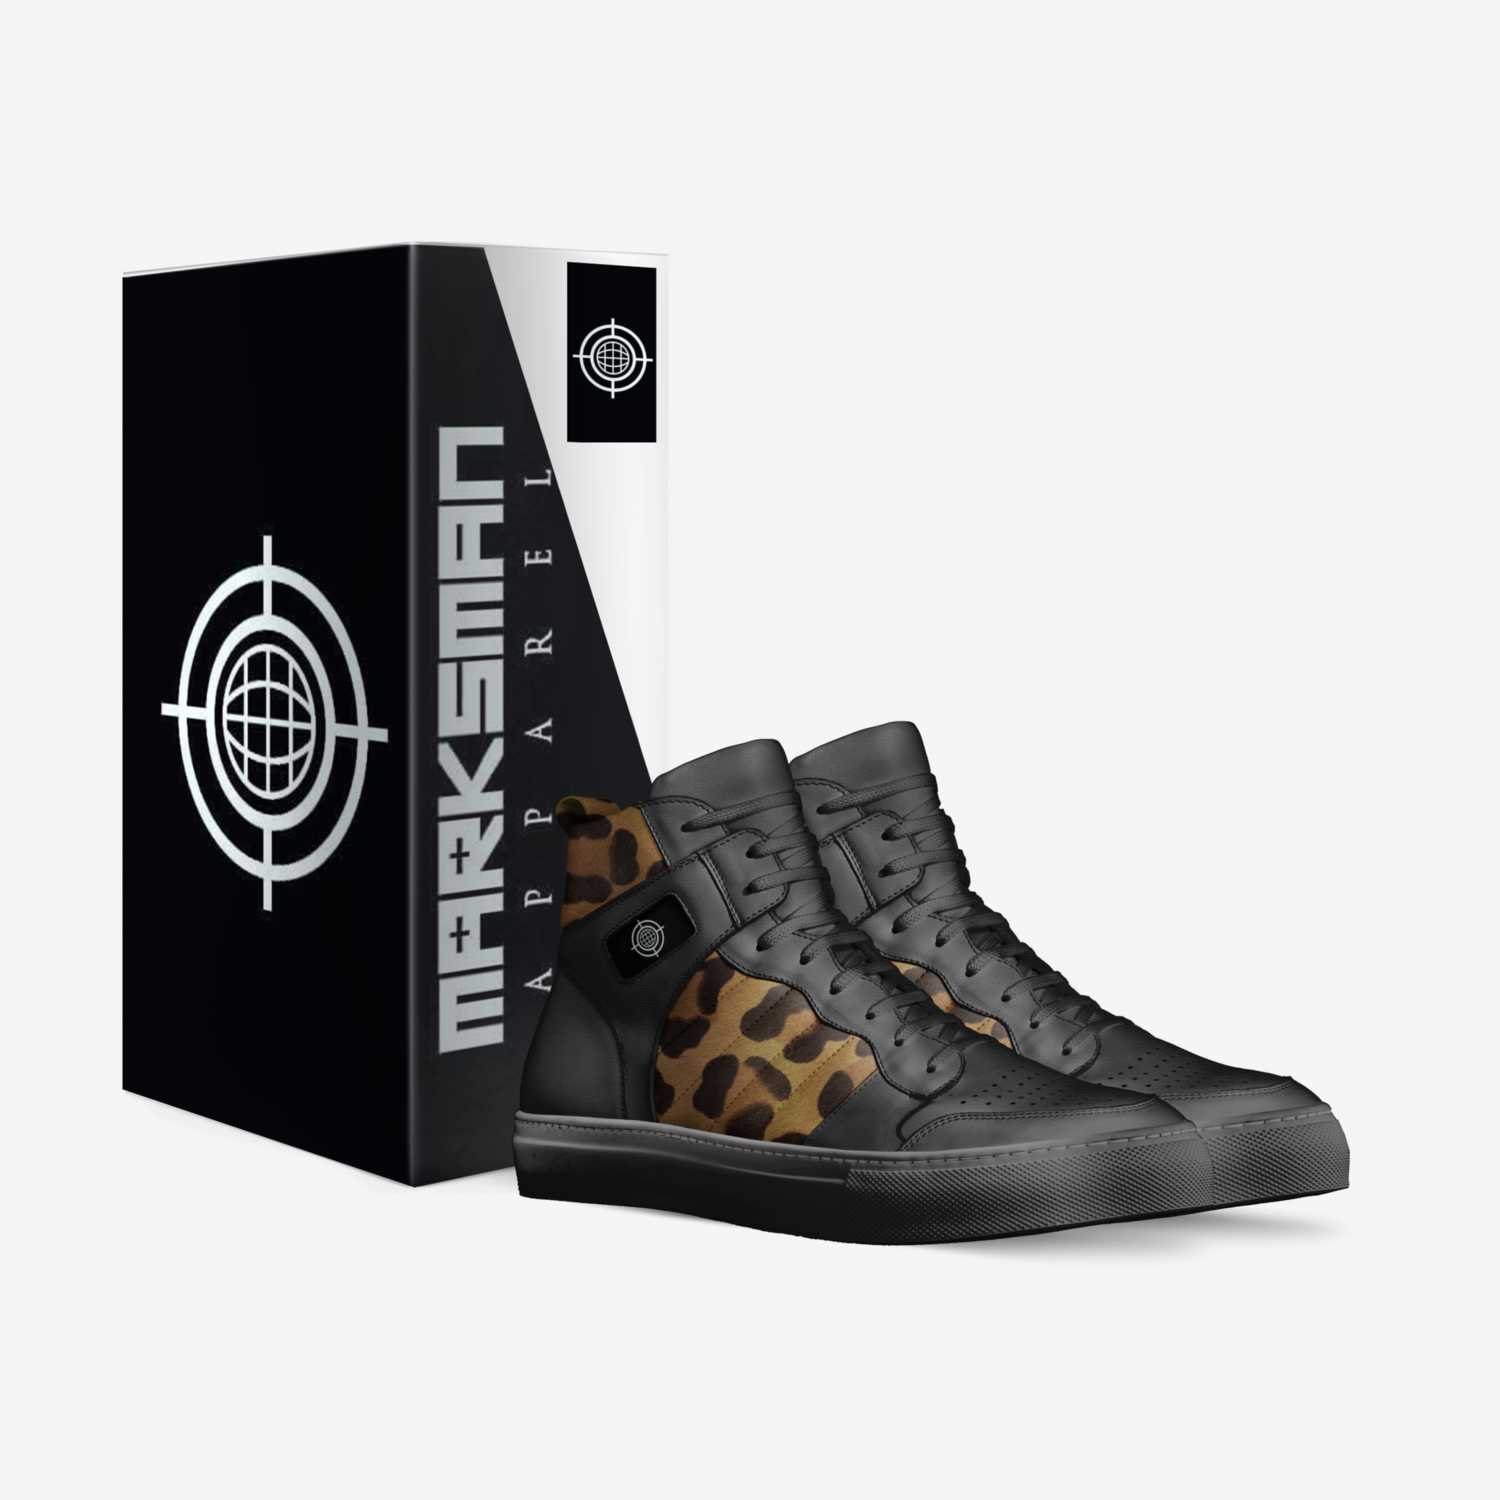 Huntsman custom made in Italy shoes by Marksman Apparel | Box view